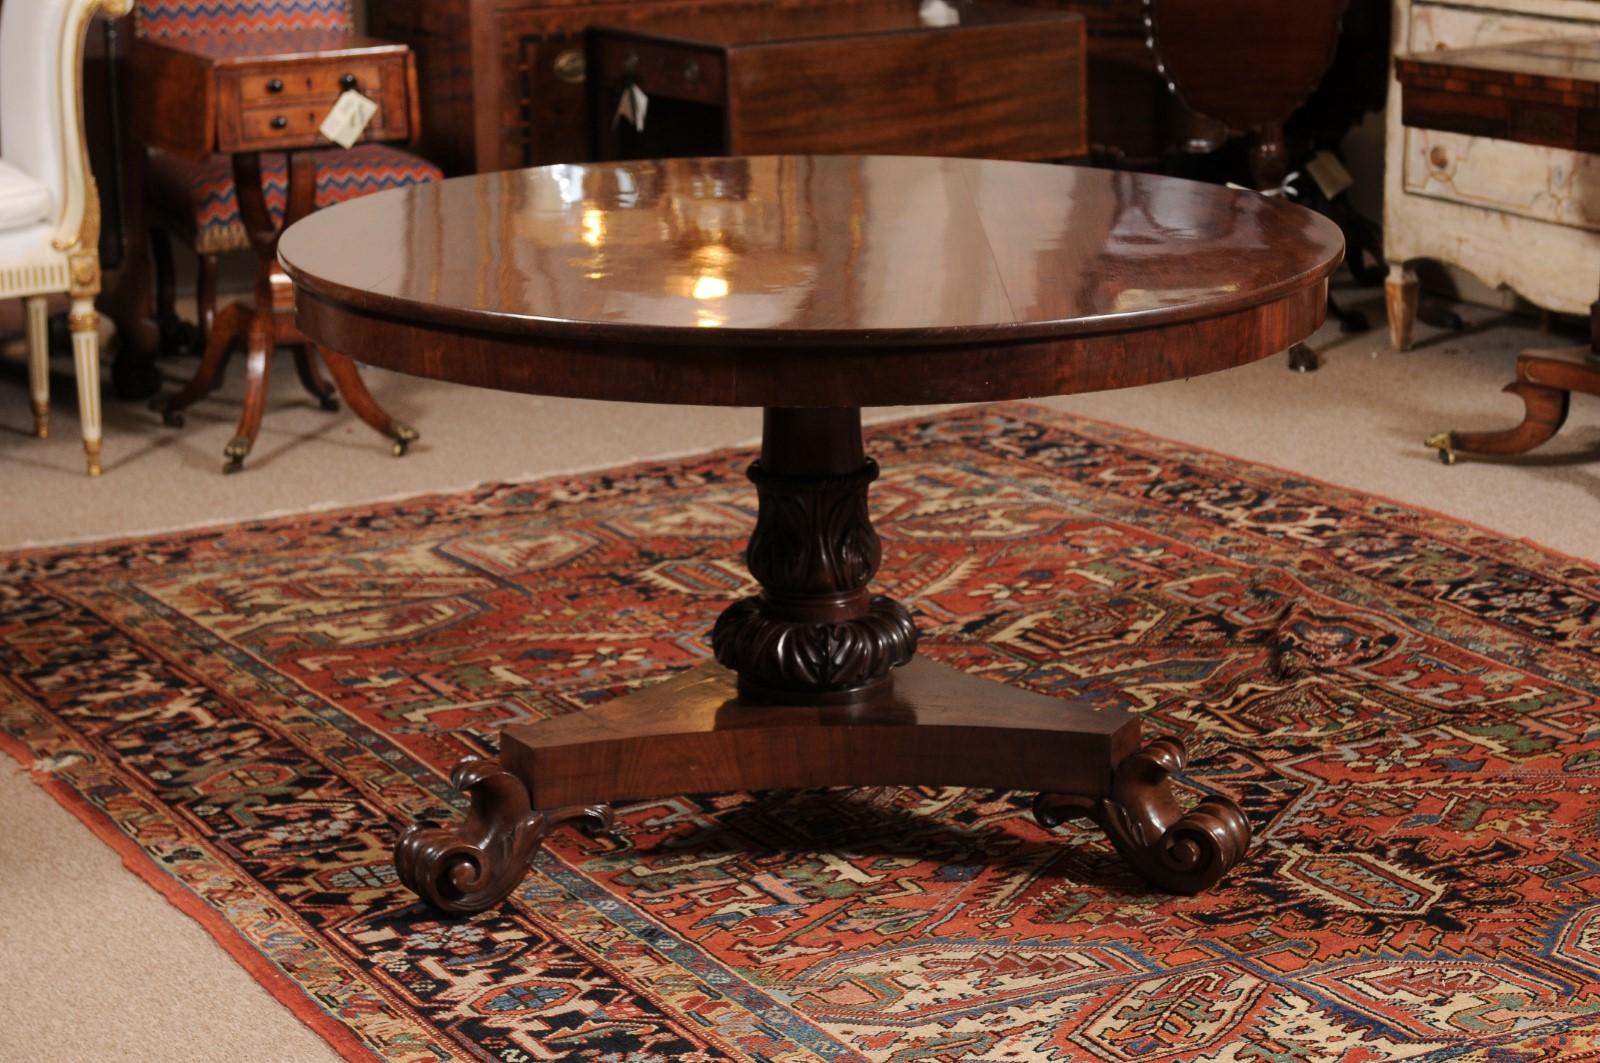  19th Century English Mahogany Center Table with Pedestal Base & Scroll Feet For Sale 1